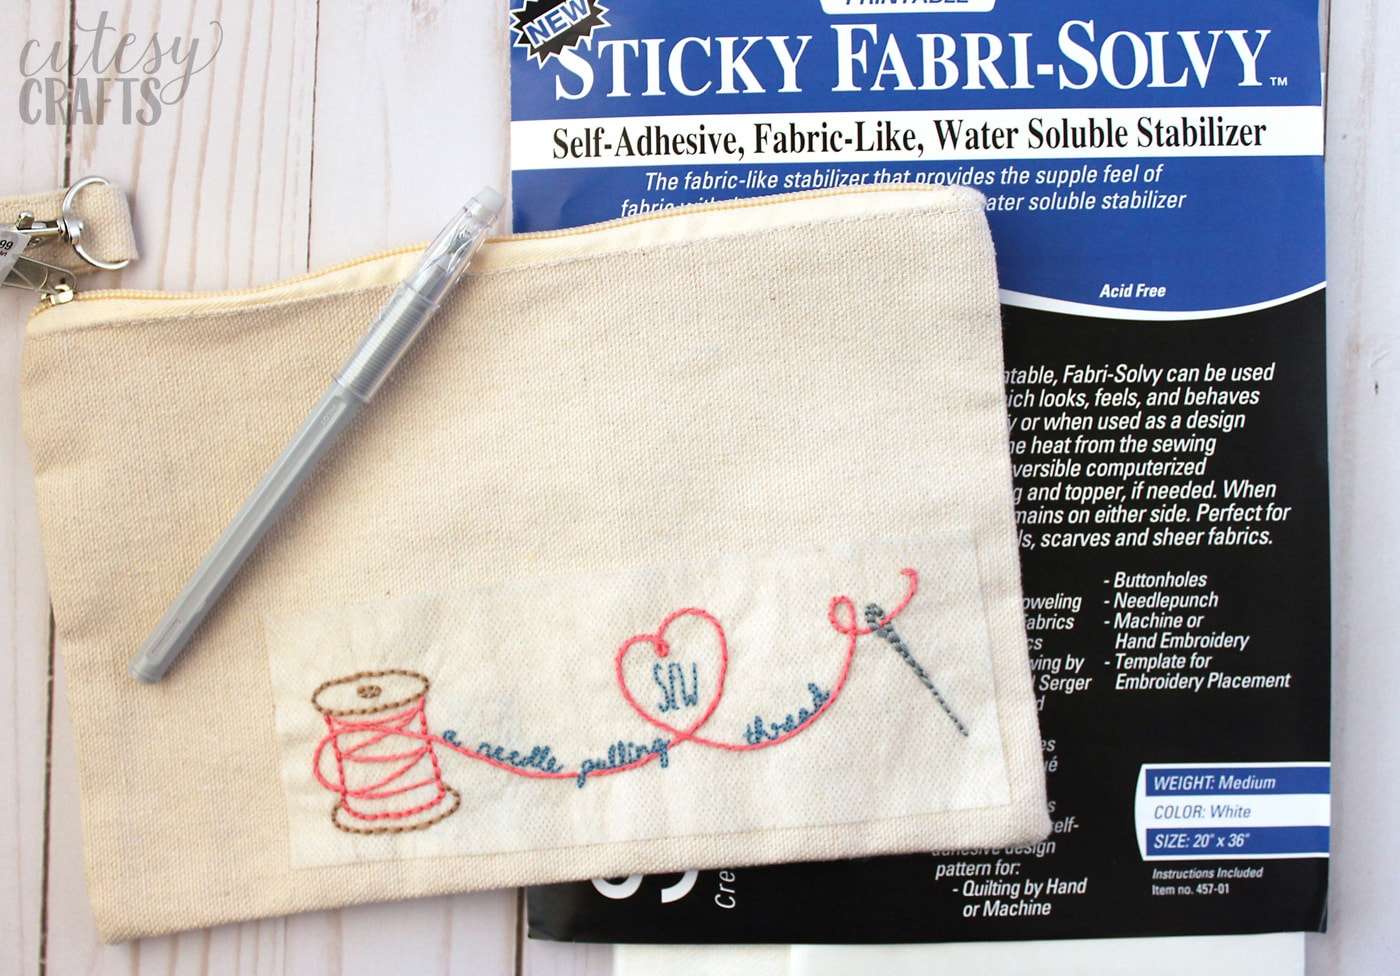 Make Embroidery Pattern Adorable Diy Sew A Needle Pulling Thread Bag Free Hand